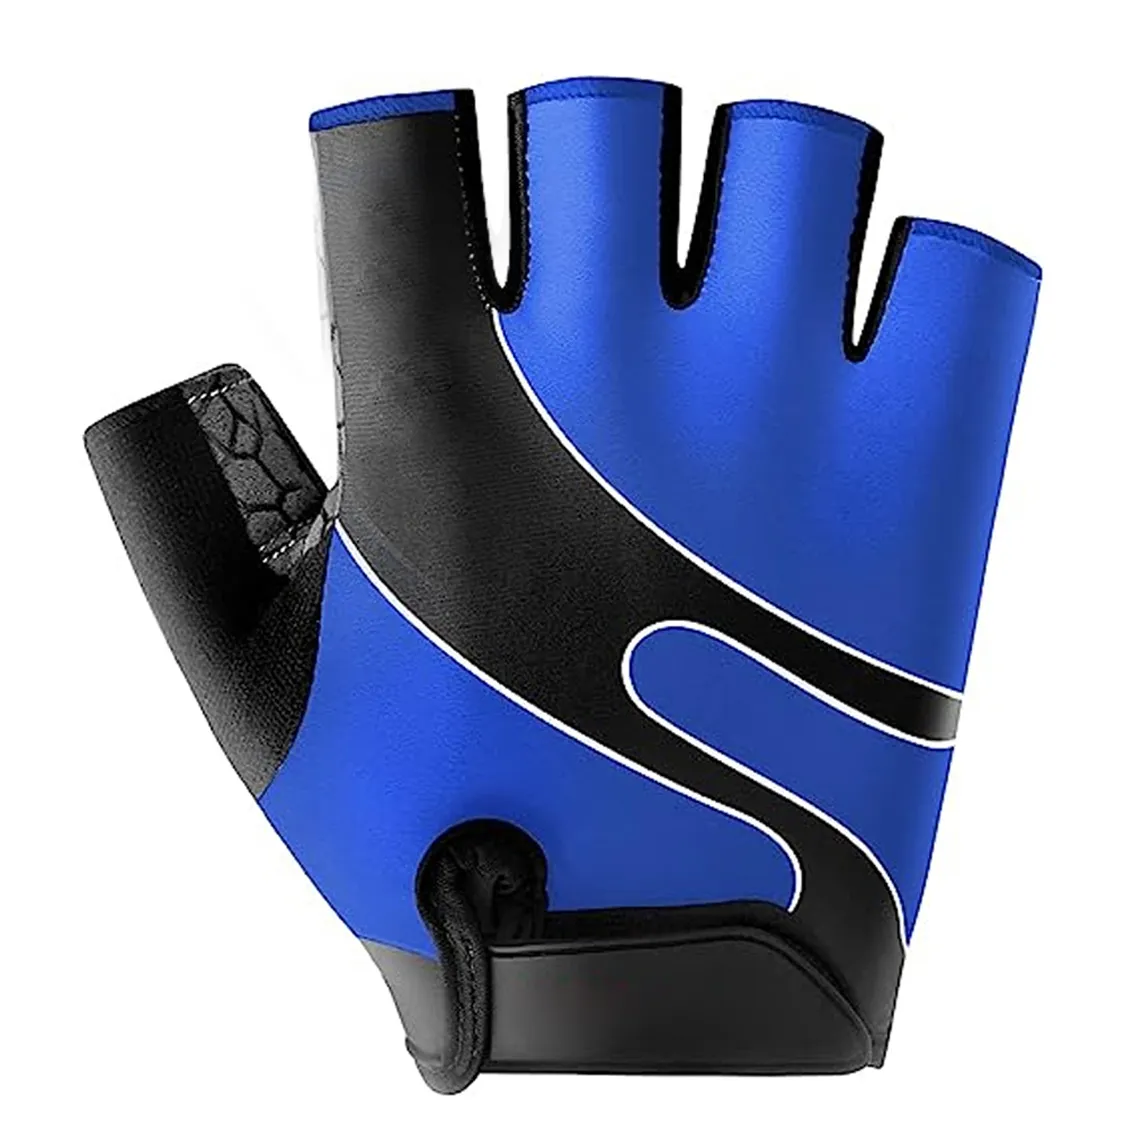 Cycling Gloves Half Finger Gloves Gel Padded Anti-slip Cycling Racing Gloves Bicycle Bike Anti Slip Shock Breathable